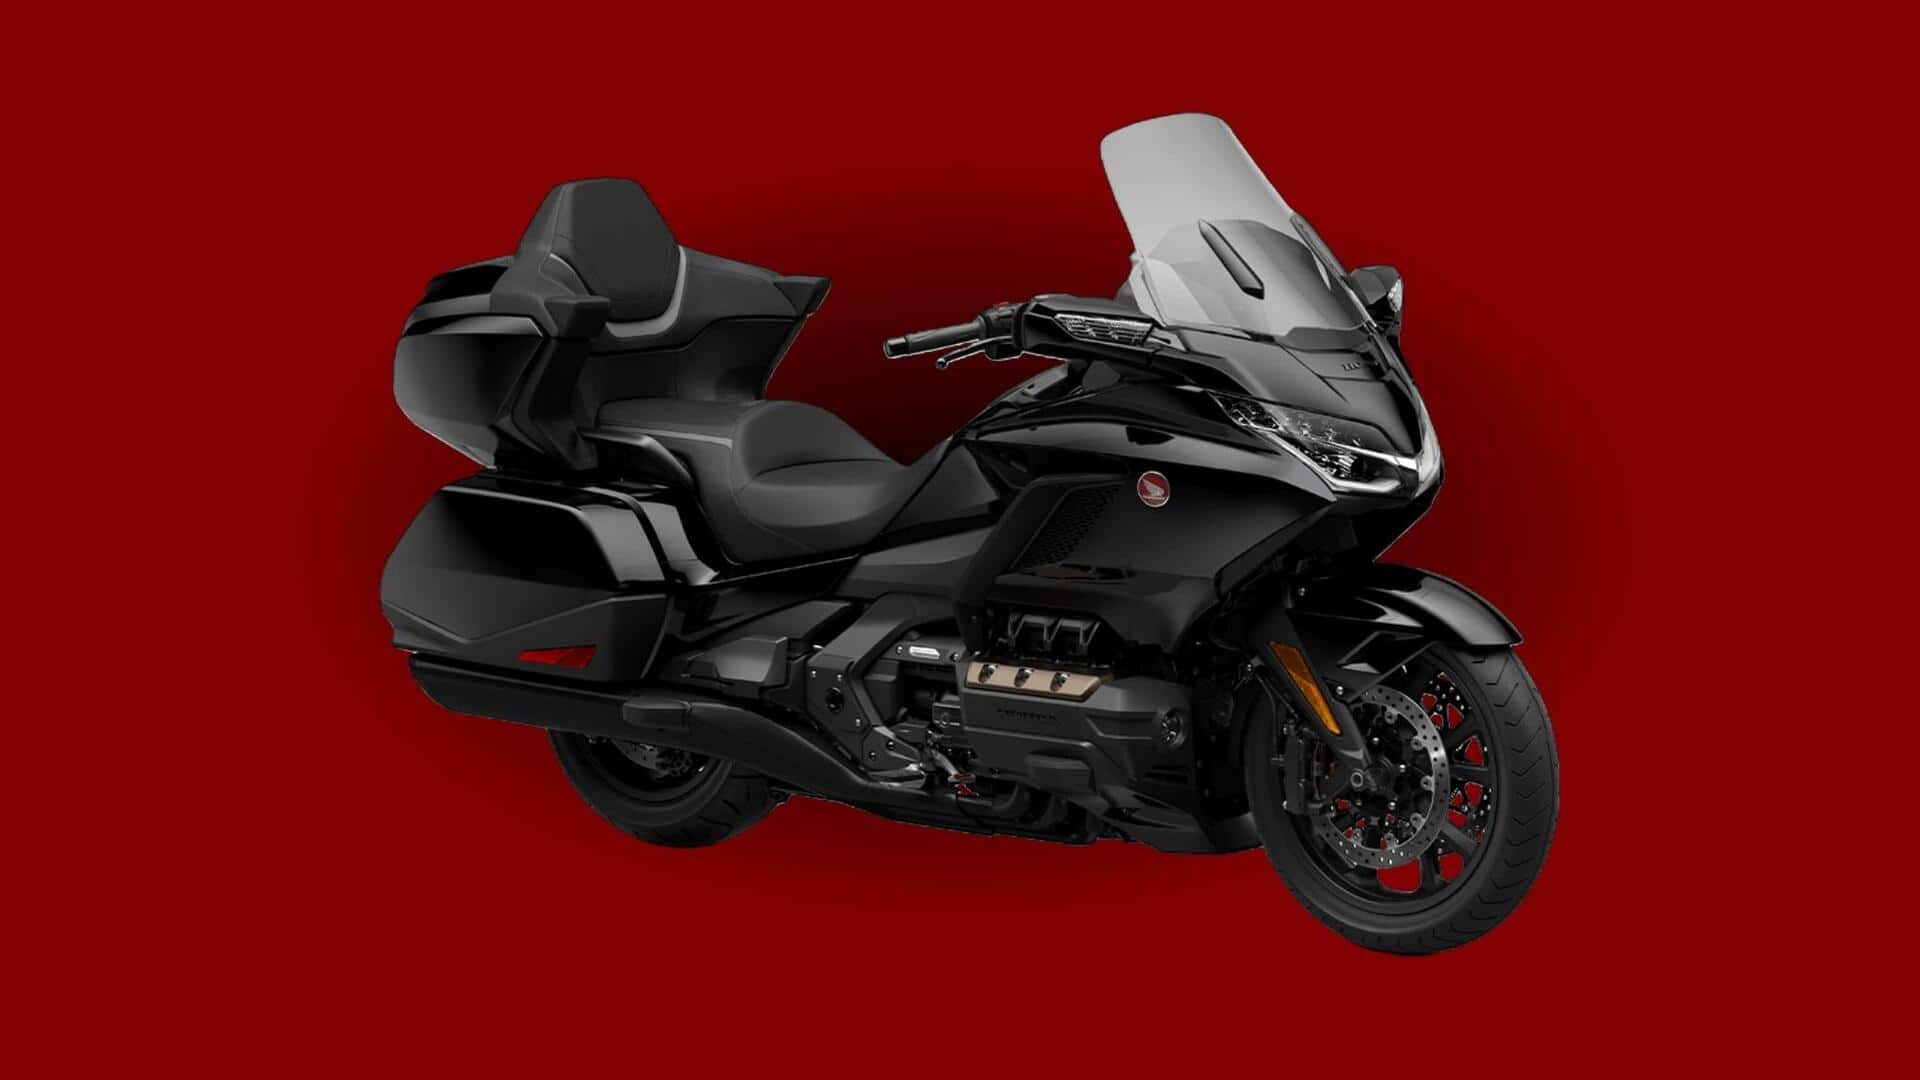 How Honda Gold Wing fares against Indian Chieftain Elite